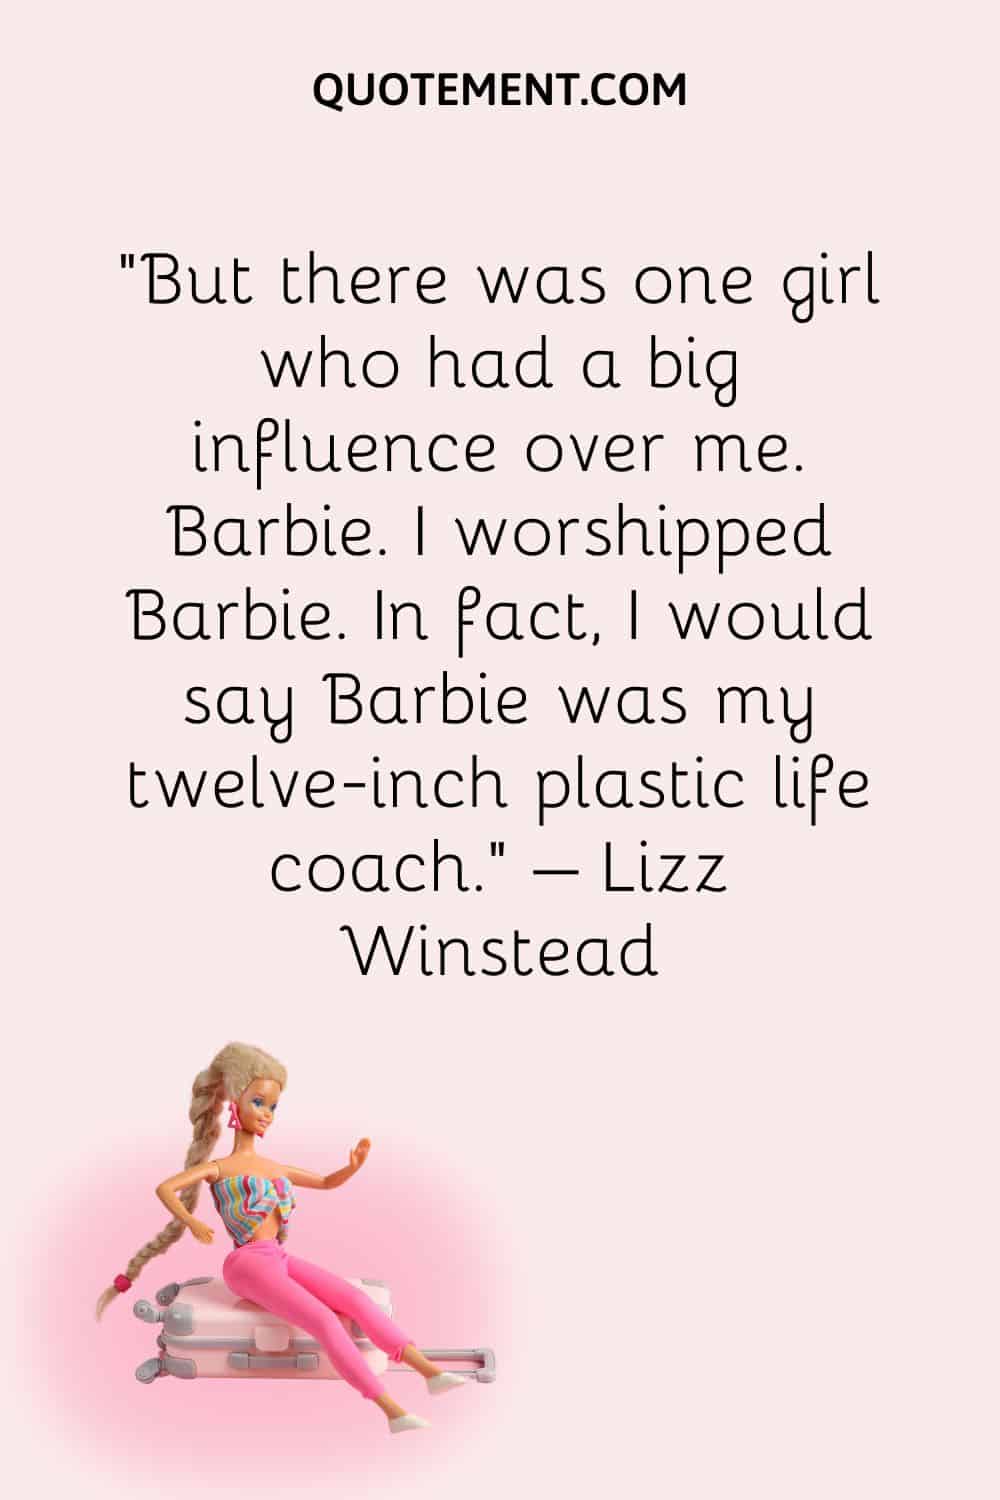 But there was one girl who had a big influence over me. Barbie